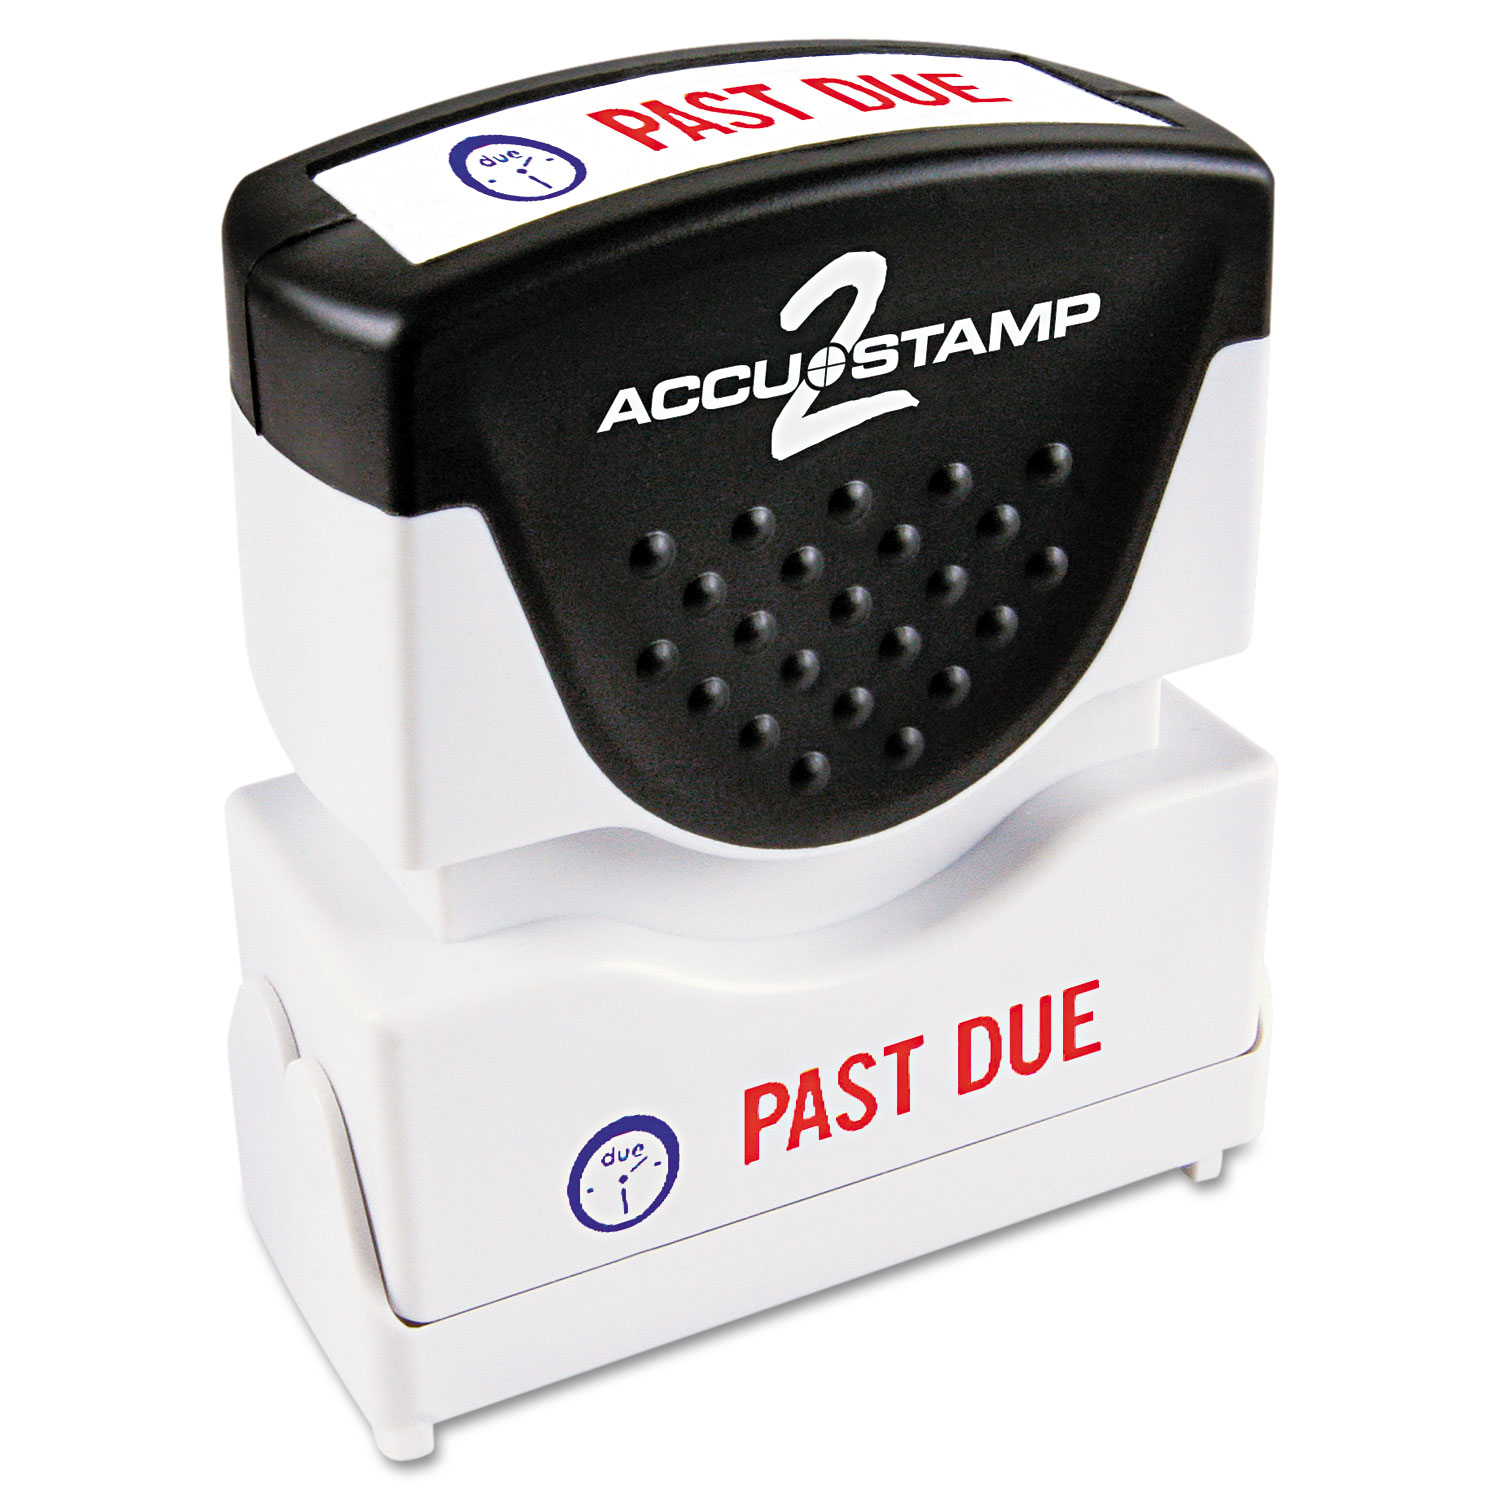  ACCUSTAMP2 035543 Pre-Inked Shutter Stamp, Red/Blue, PAST DUE, 1 5/8 x 1/2 (COS035543) 